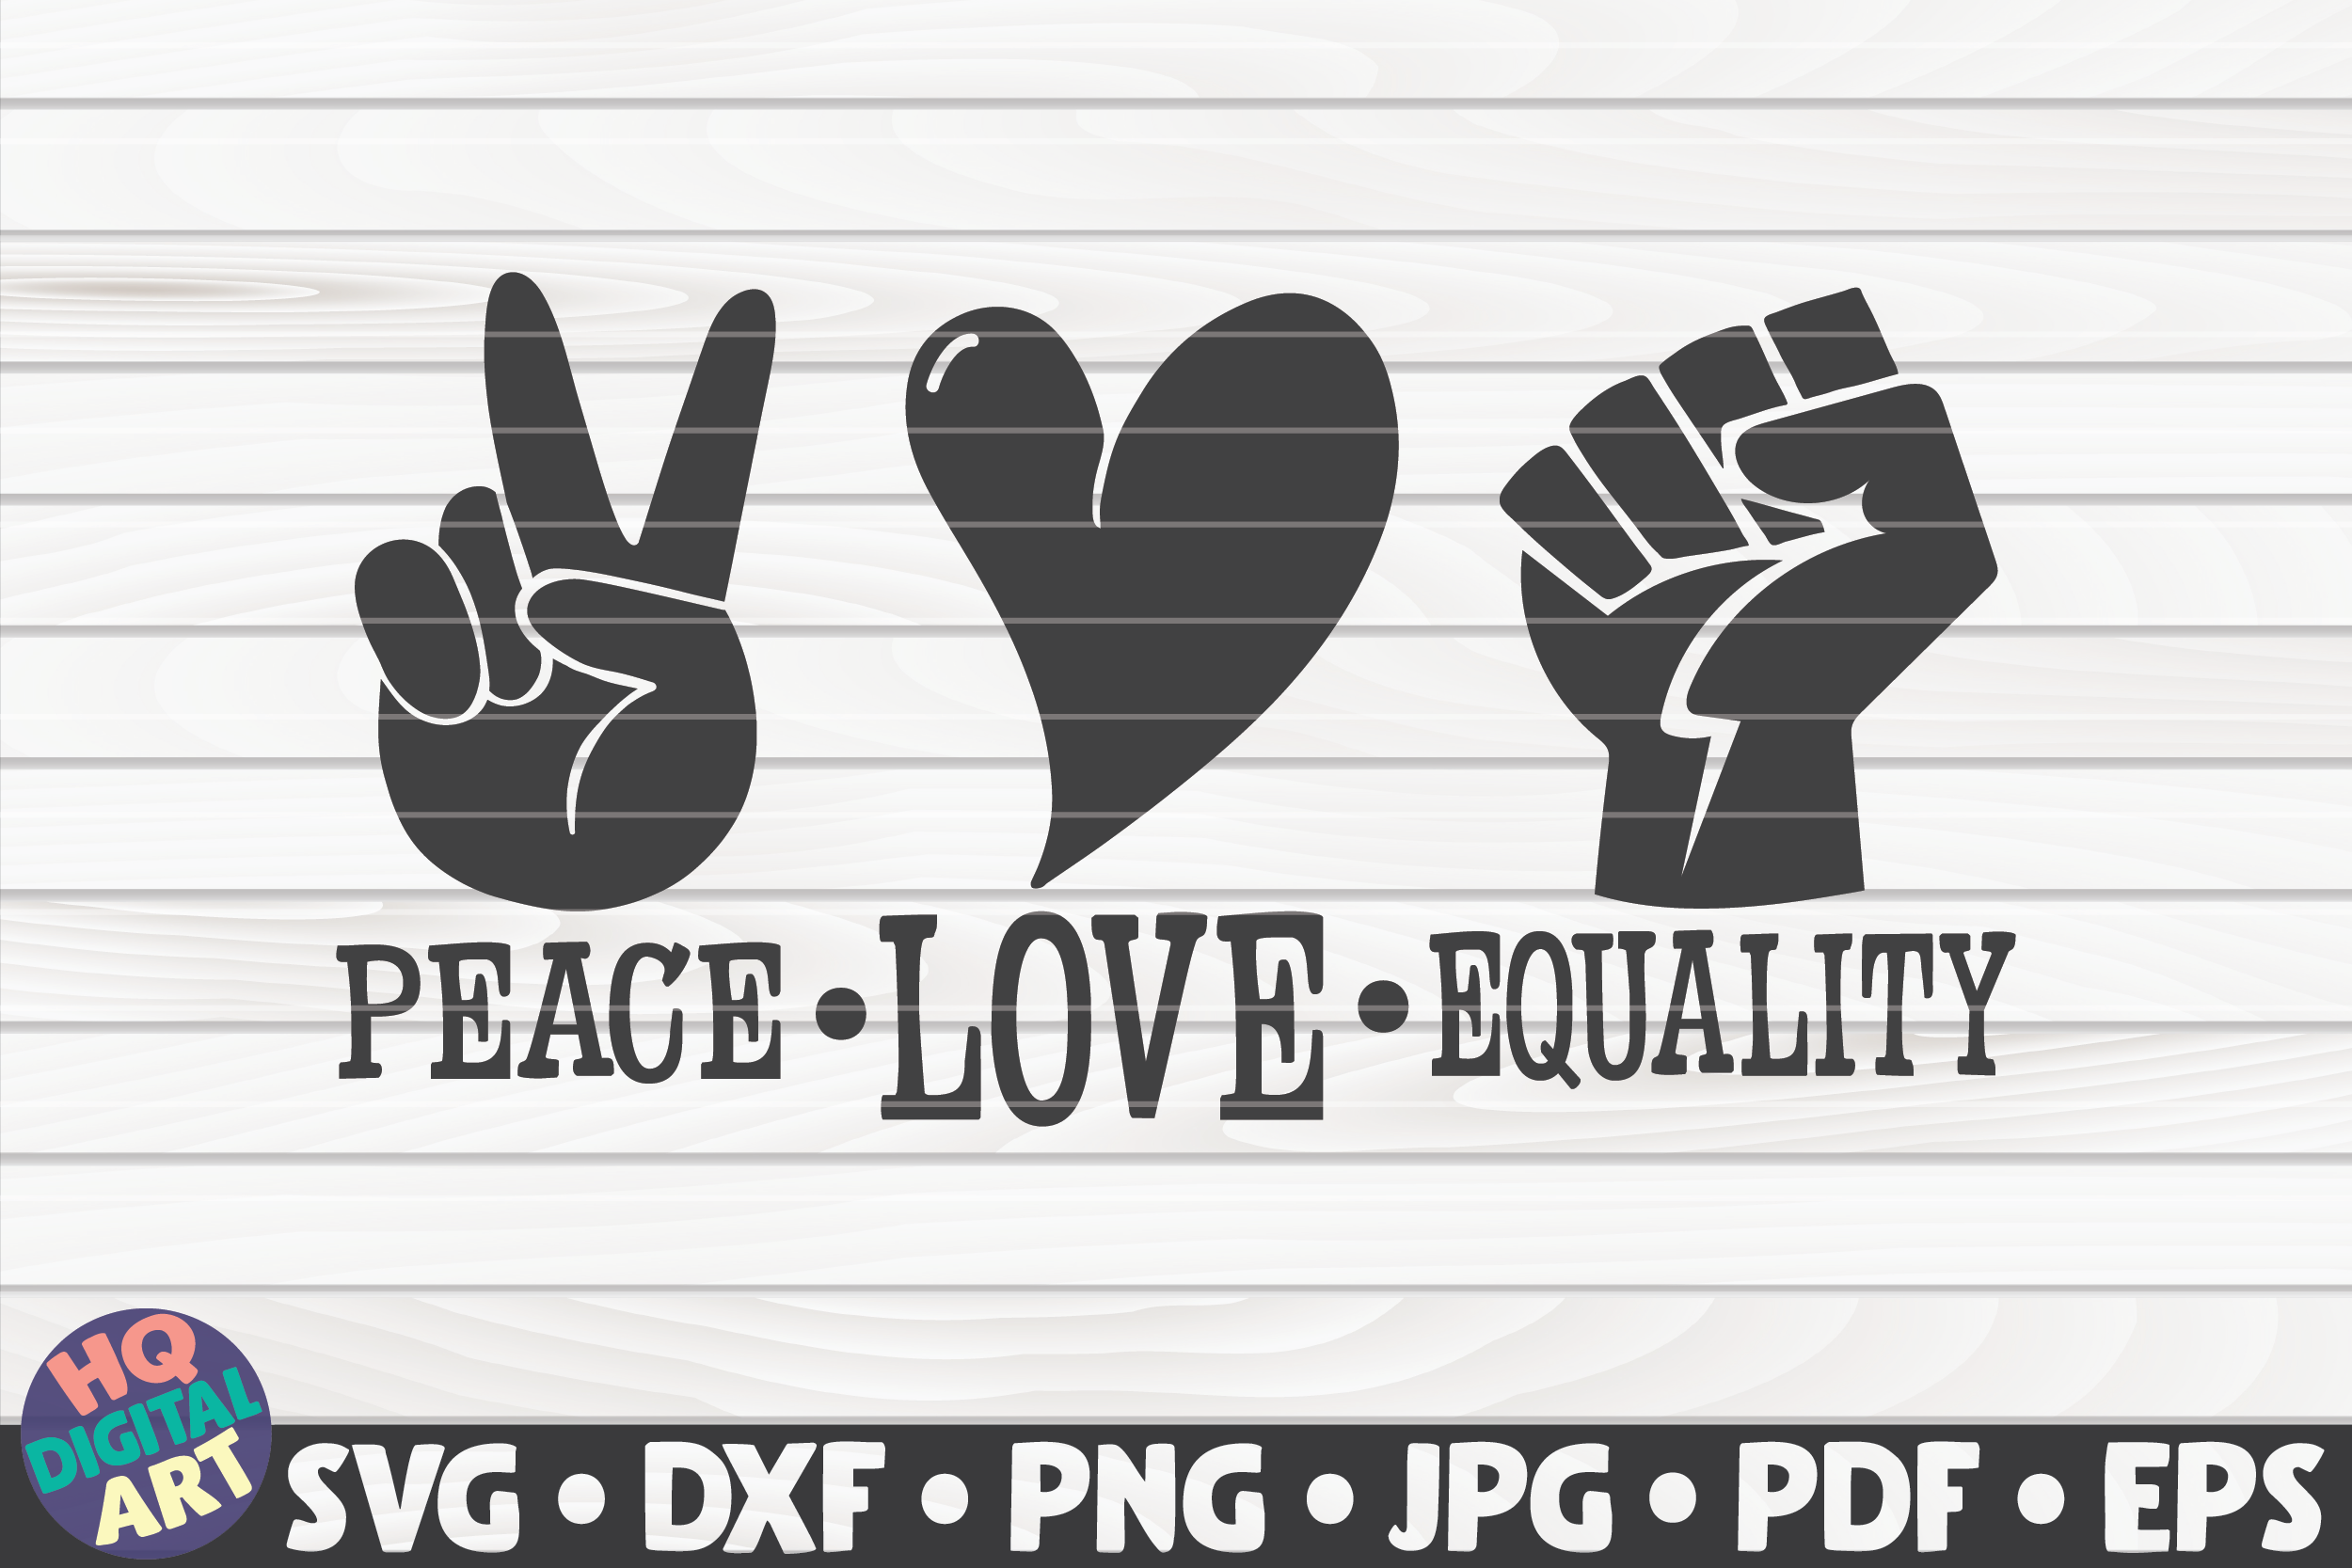 Download Peace love equality SVG | BLM Quote By HQDigitalArt ...